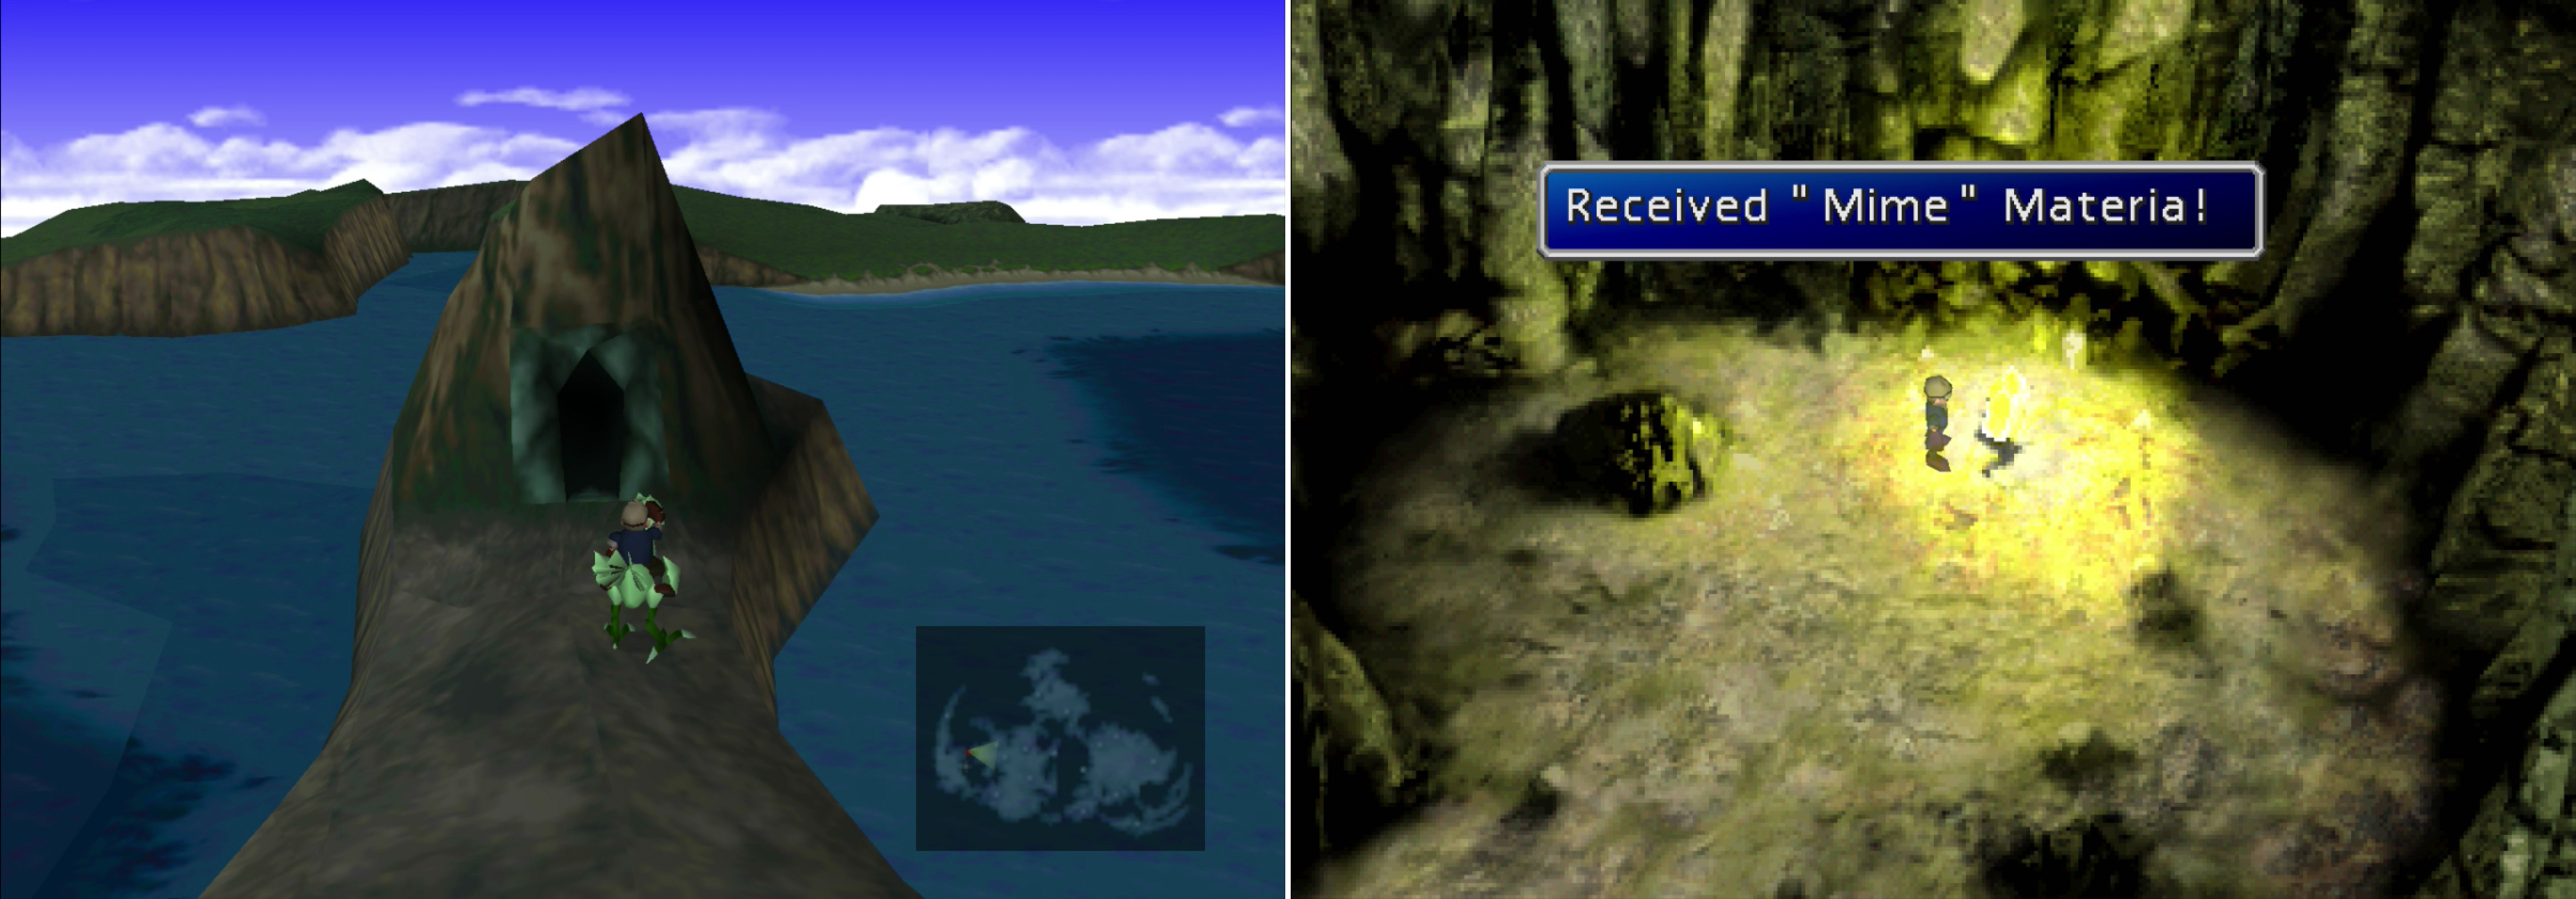 Find a cave near Wutai, which can be reached by riding a Green Chocobo (left). Inside youll find the immensely useful Mime Materia (right).